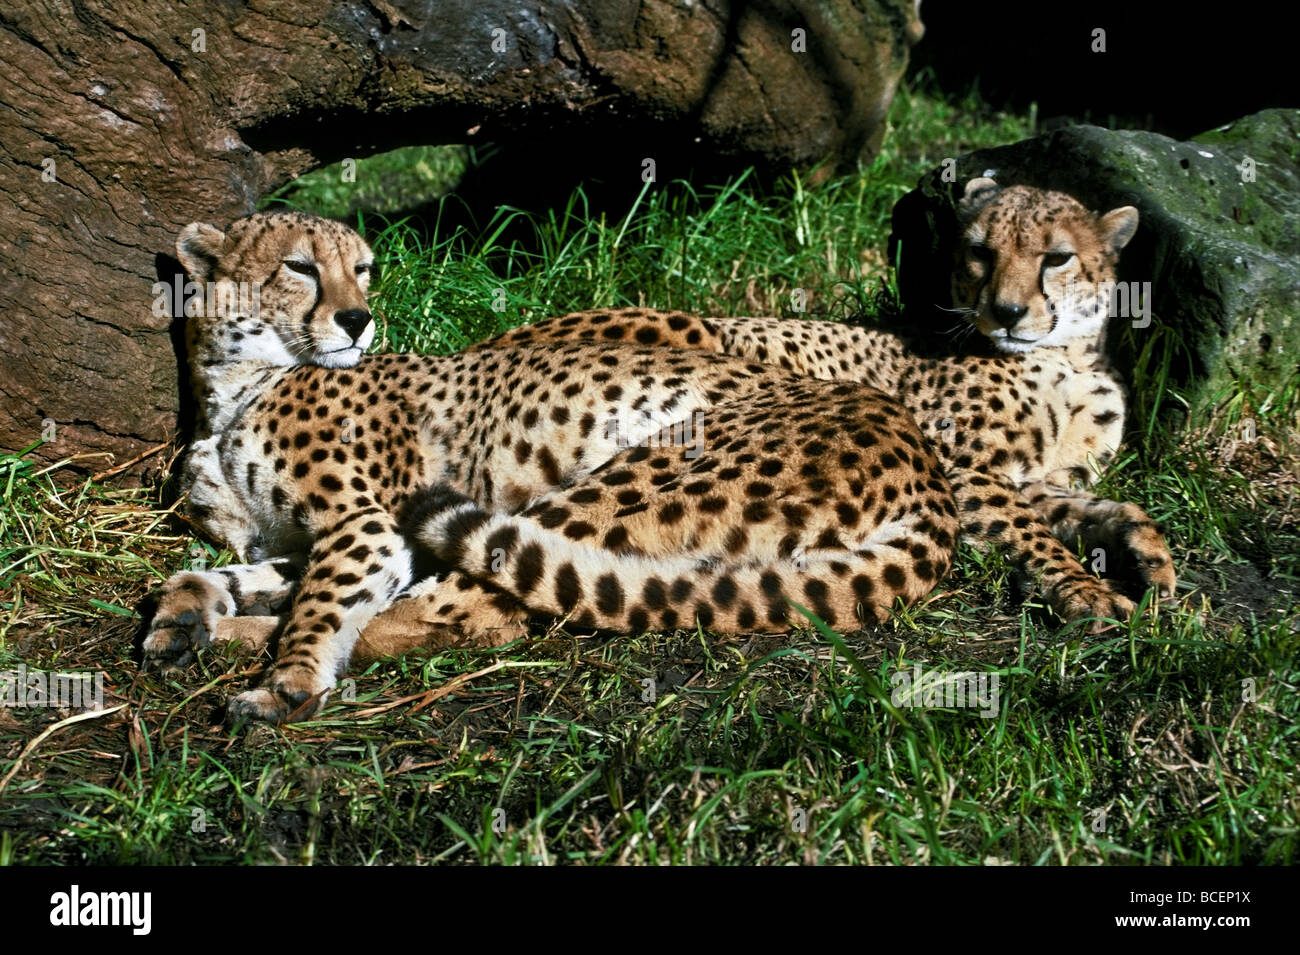 Two sleepy male Cheetahs, brothers, curled up together in the sun. Stock Photo